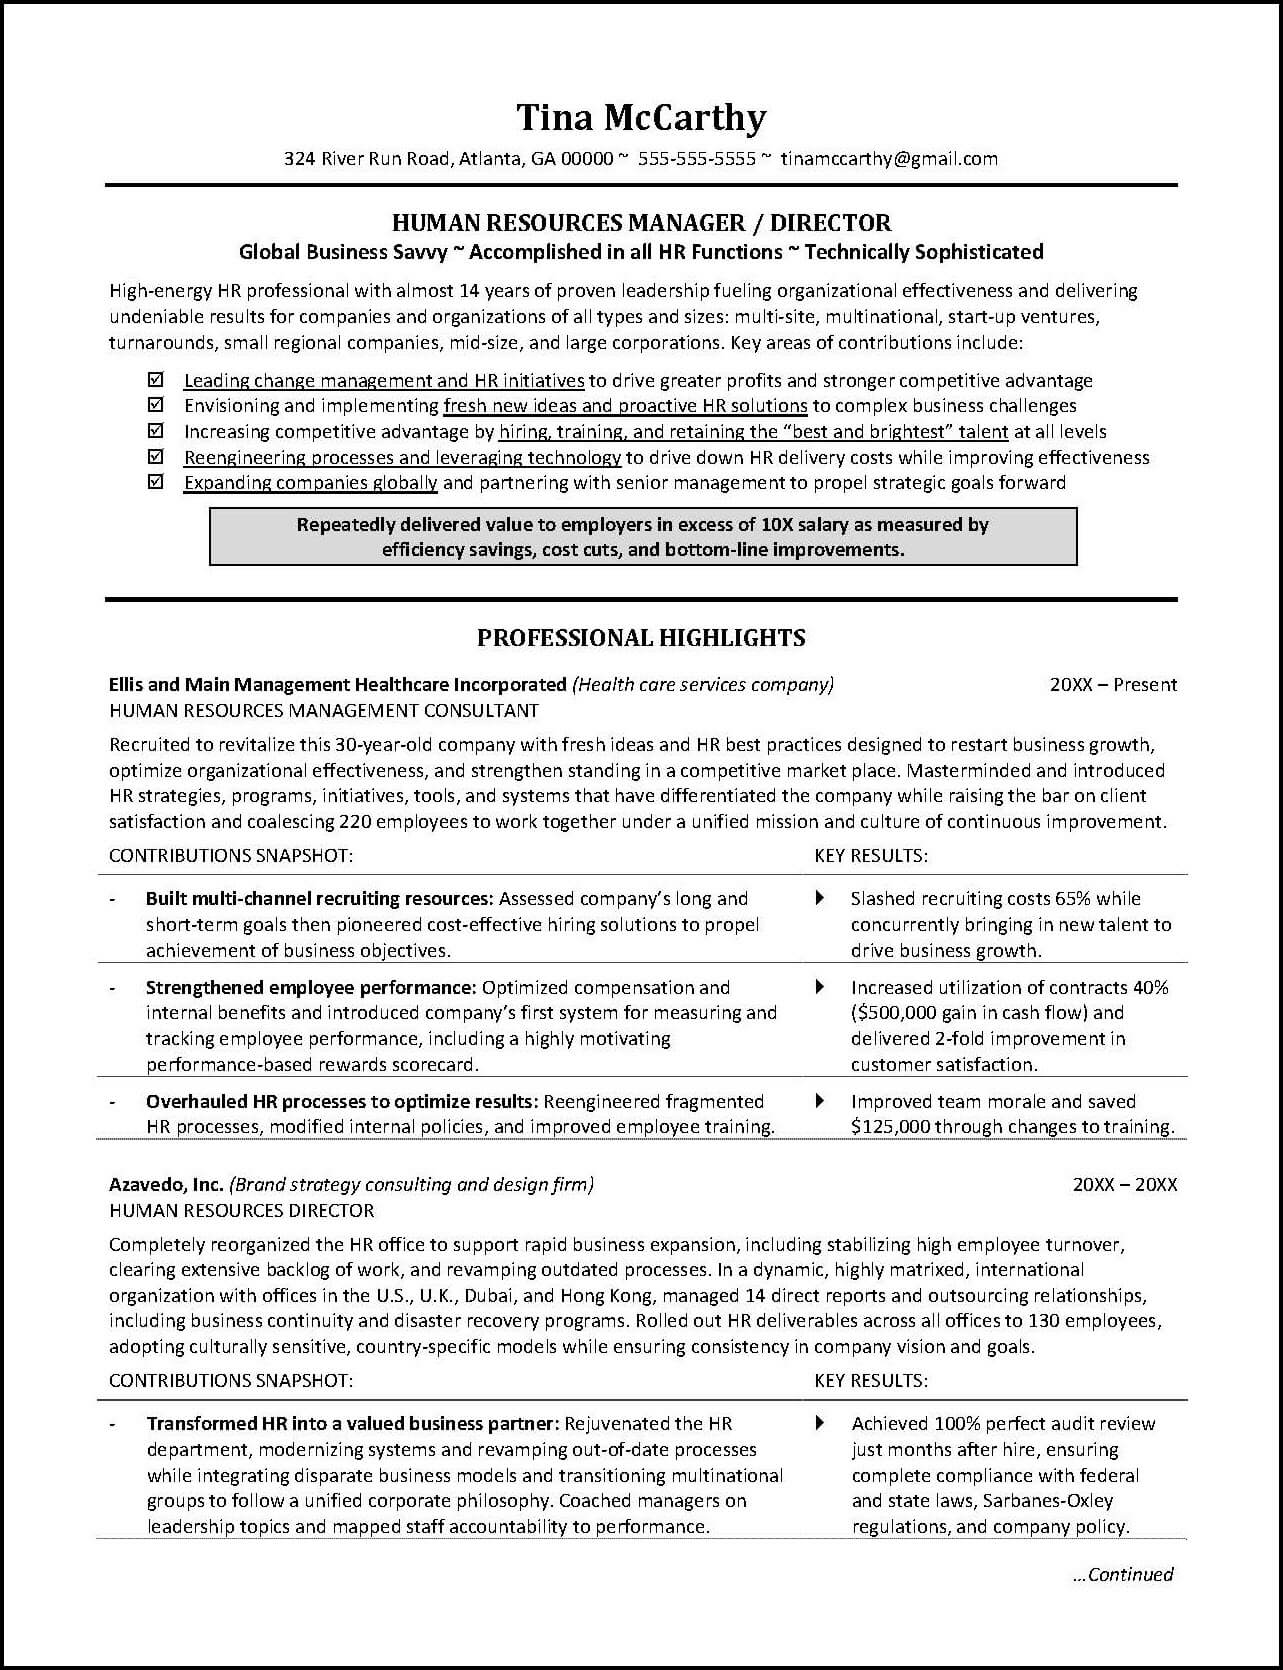 Professional Resume Examples Human Resources Resume Page 1 professional resume examples|wikiresume.com